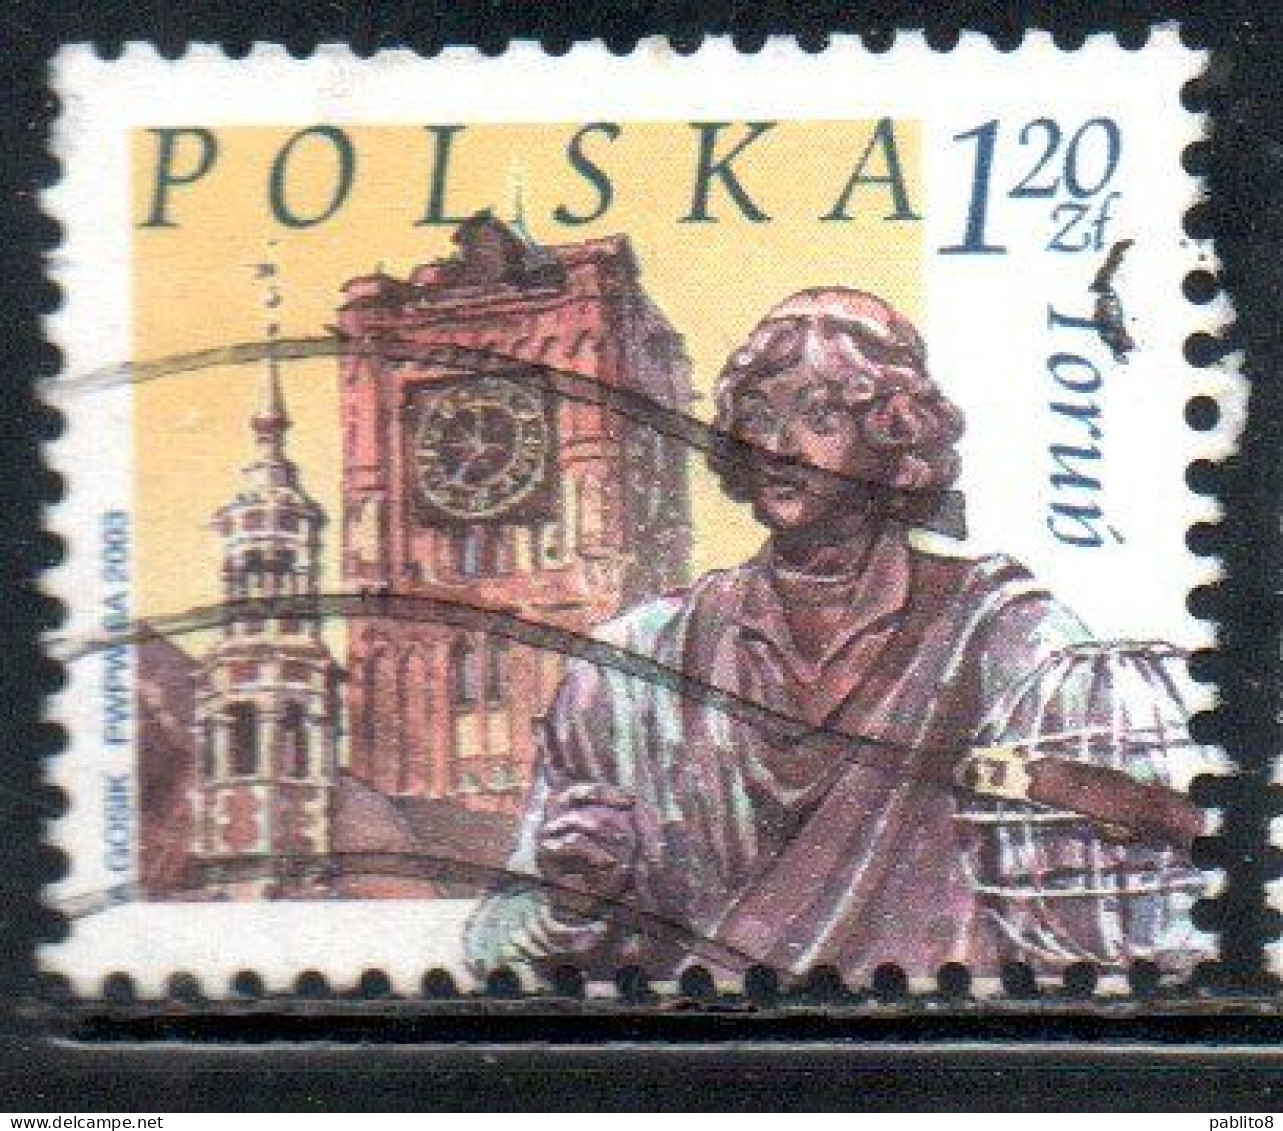 POLONIA POLAND POLSKA 2003 TOWER OF OLD CITY HALL STATUE OF NICOLAUS COPERNICUS TORUN 1.20z USED USATO OBLITERE' - Used Stamps